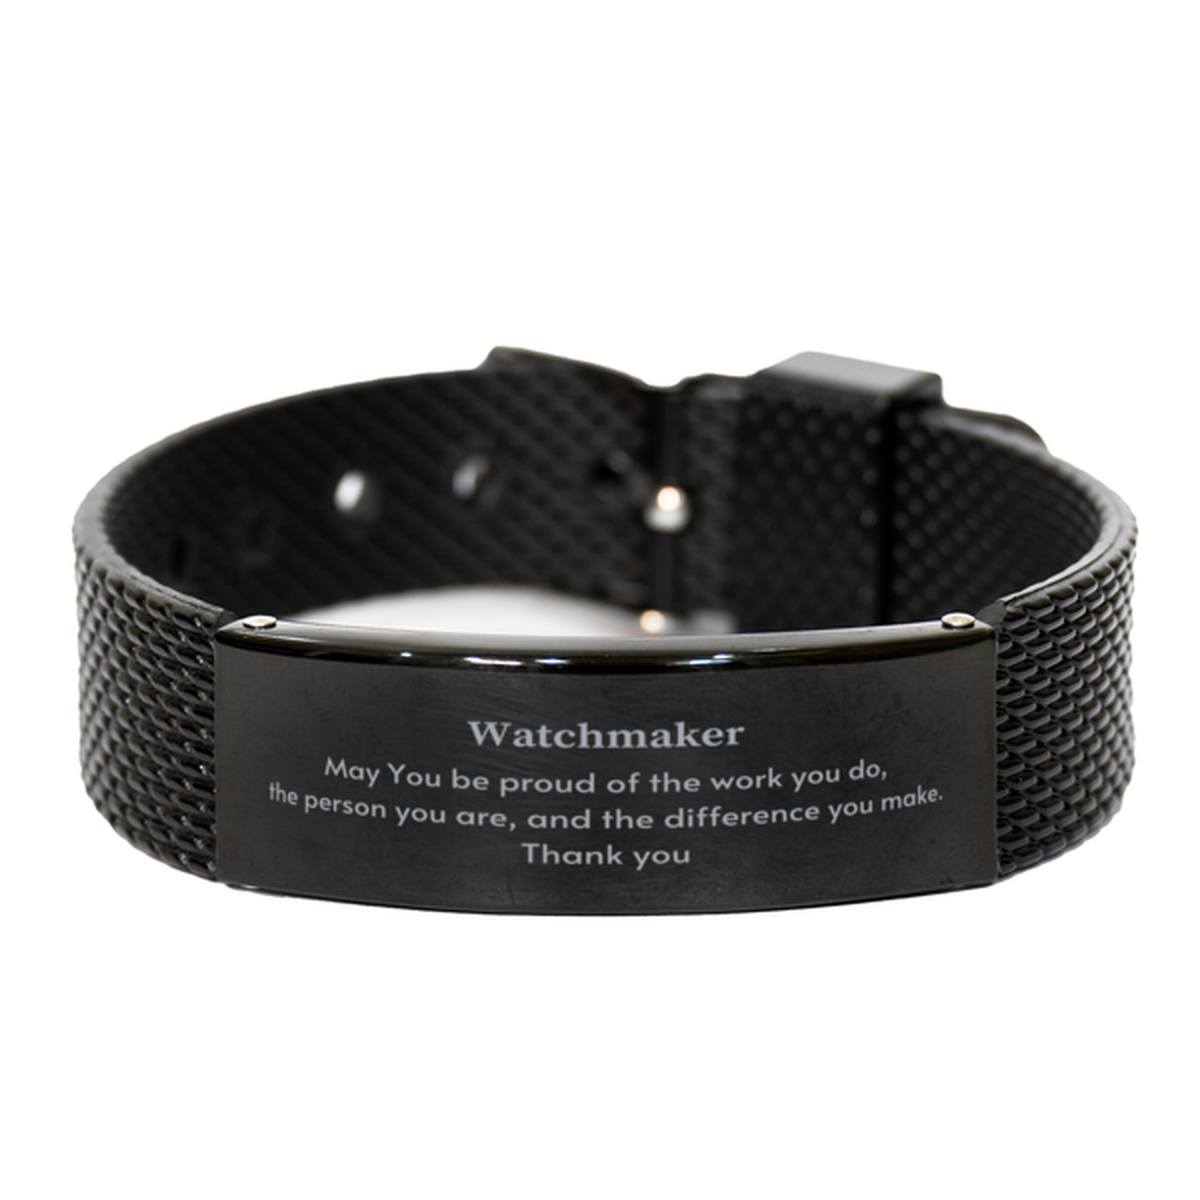 Heartwarming Black Shark Mesh Bracelet Retirement Coworkers Gifts for Watchmaker, Watchmaker May You be proud of the work you do, the person you are Gifts for Boss Men Women Friends